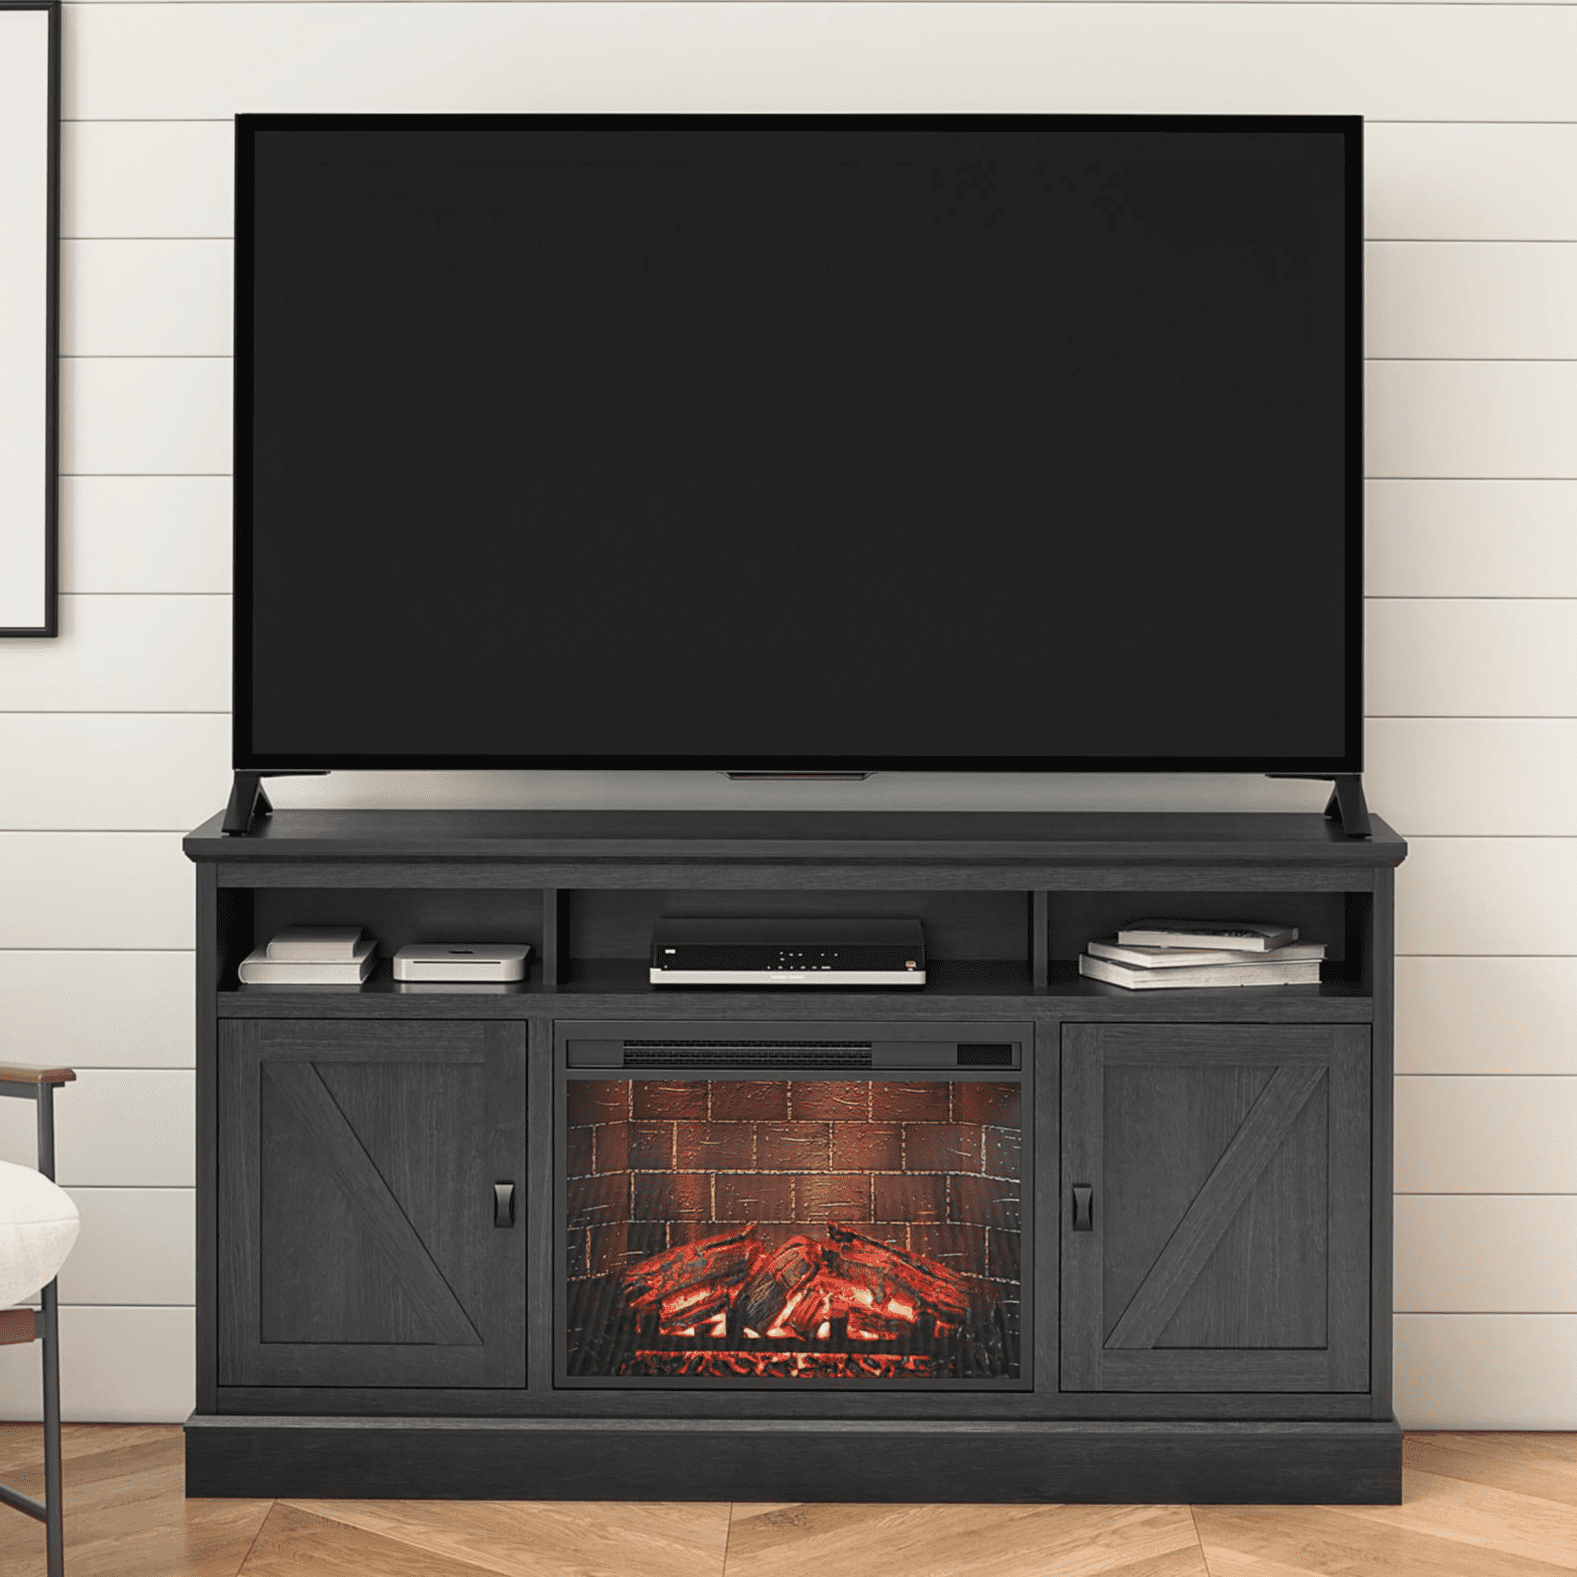 Ameriwood Home Ashton Lane Electric Fireplace TV Stand for TVs up to 65" (Black Oak or Rustic Oak) $198 + Free Shipping